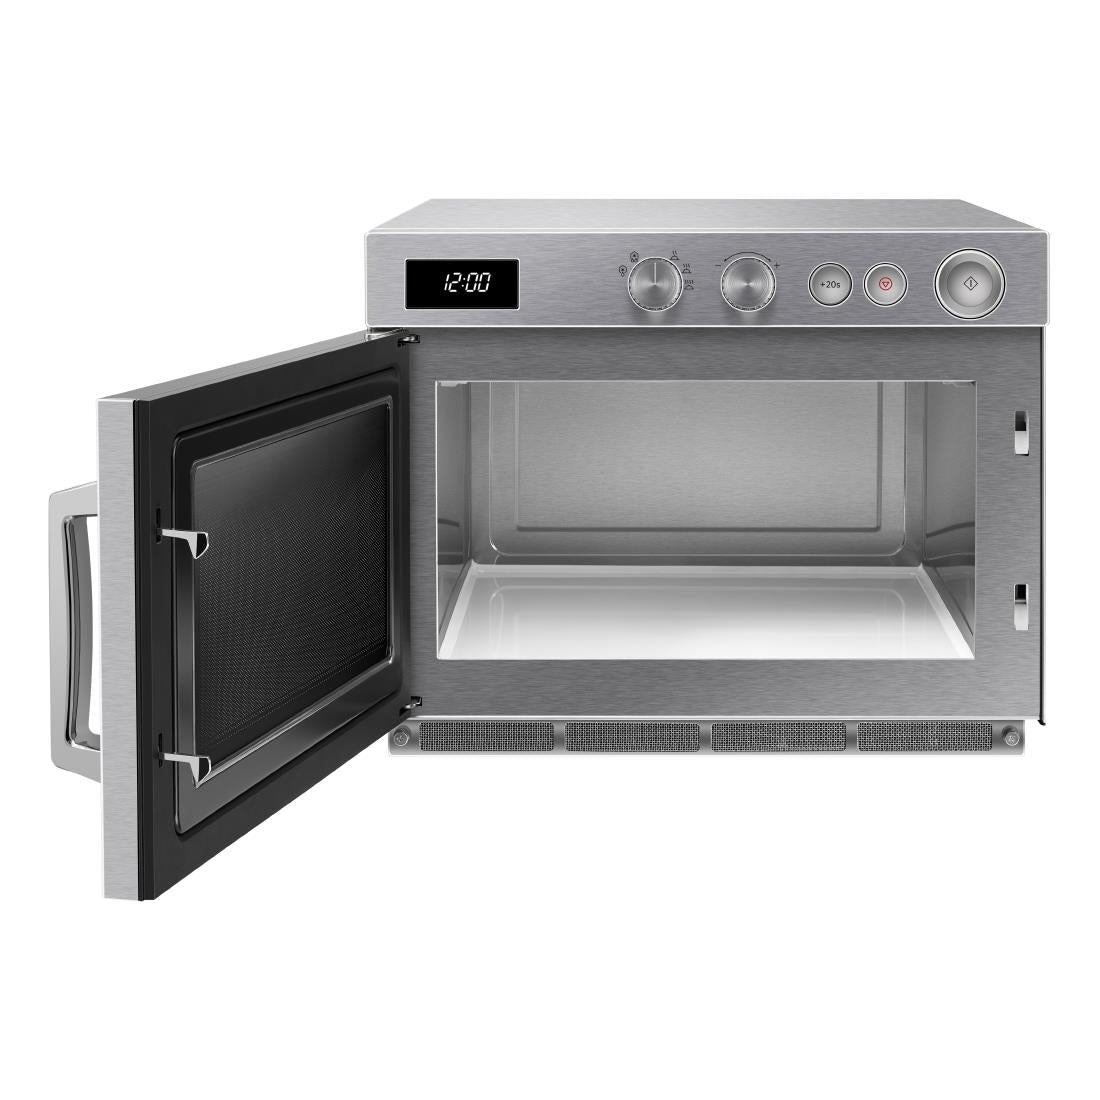 Samsung Manual Commercial Microwave 1850W FS315